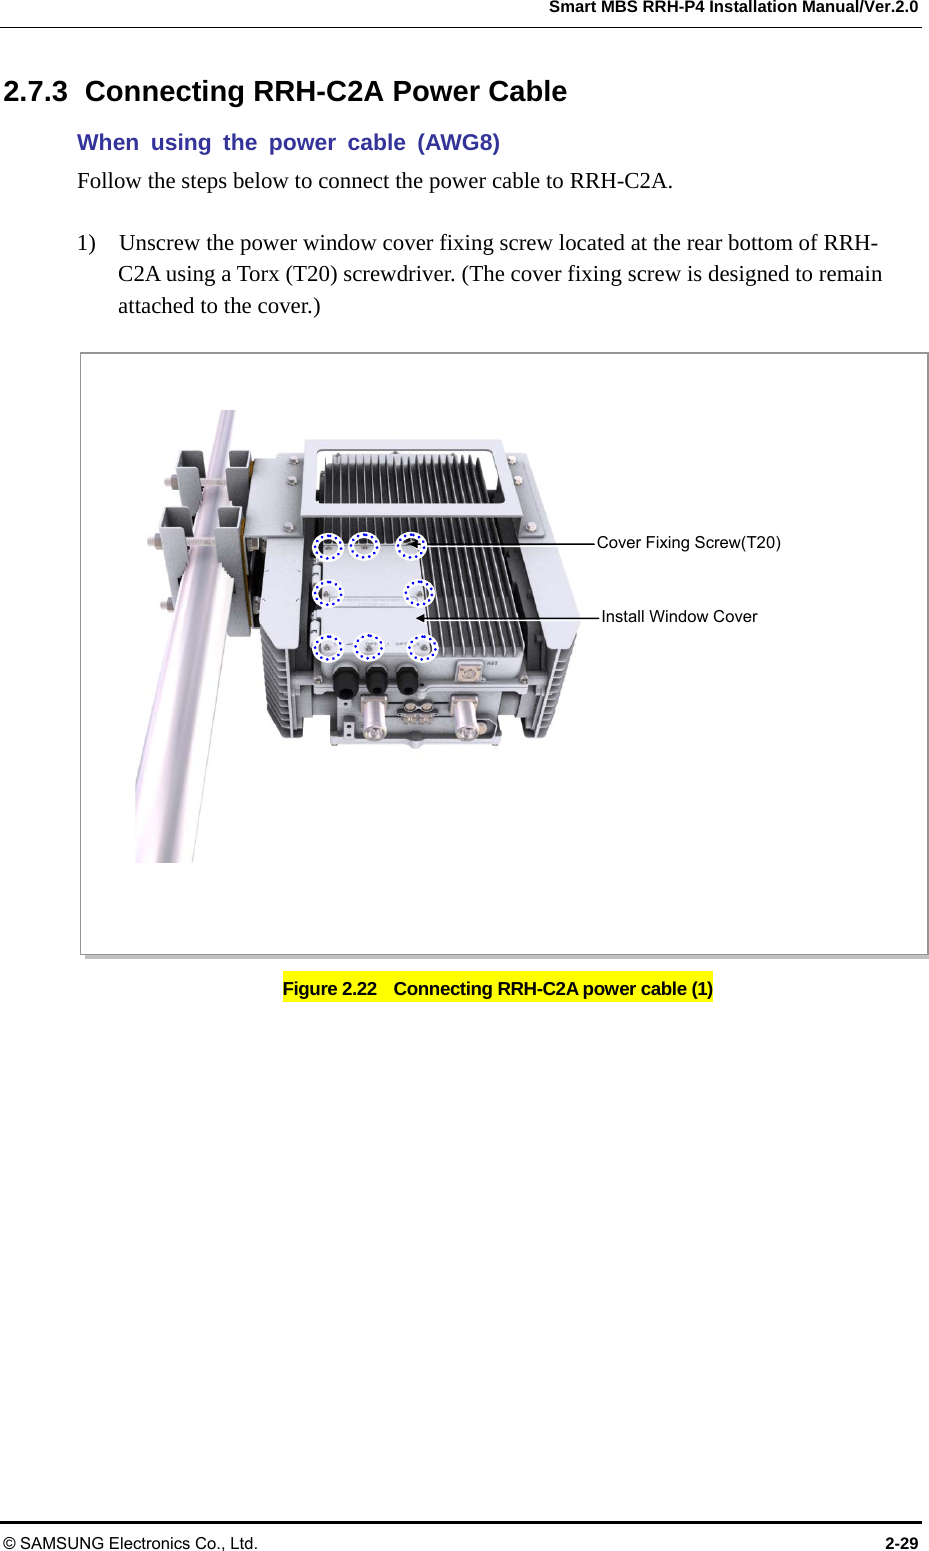  Smart MBS RRH-P4 Installation Manual/Ver.2.0 © SAMSUNG Electronics Co., Ltd.  2-29 2.7.3  Connecting RRH-C2A Power Cable When using the power cable (AWG8) Follow the steps below to connect the power cable to RRH-C2A.  1)    Unscrew the power window cover fixing screw located at the rear bottom of RRH-C2A using a Torx (T20) screwdriver. (The cover fixing screw is designed to remain attached to the cover.)  Figure 2.22    Connecting RRH-C2A power cable (1) Cover Fixing Screw(T20) Install Window Cover 